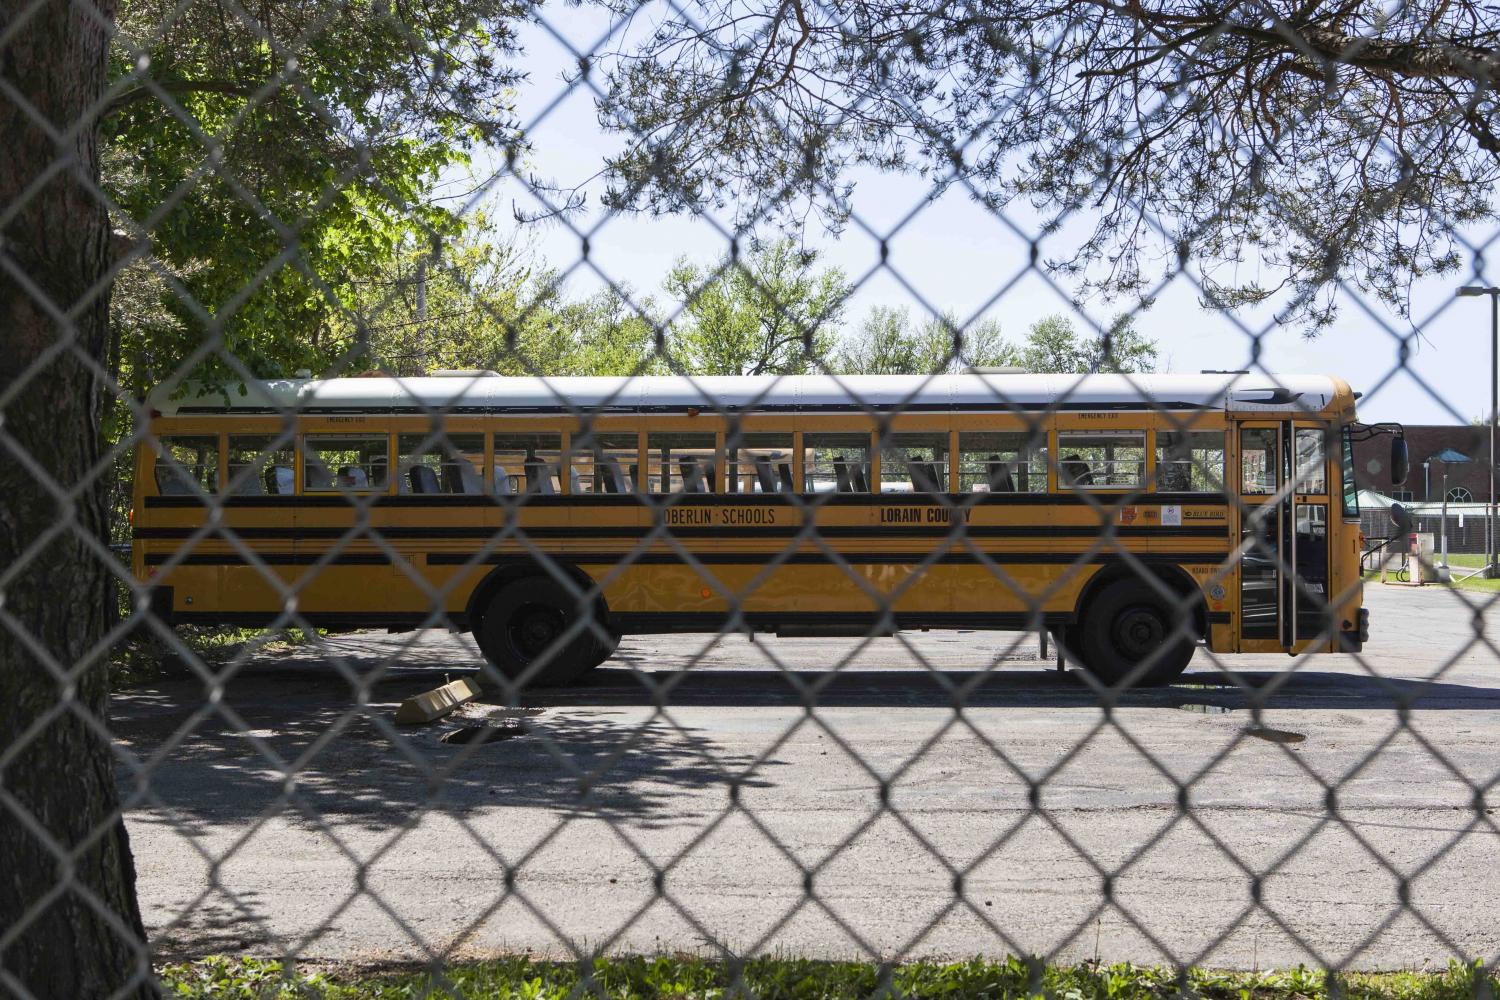 A bus parked outside of Langston Middle School. Local school parents accused the Oberlin School Board of spending an estimated excess of $1 million on school bus repairs over the past 10 years.